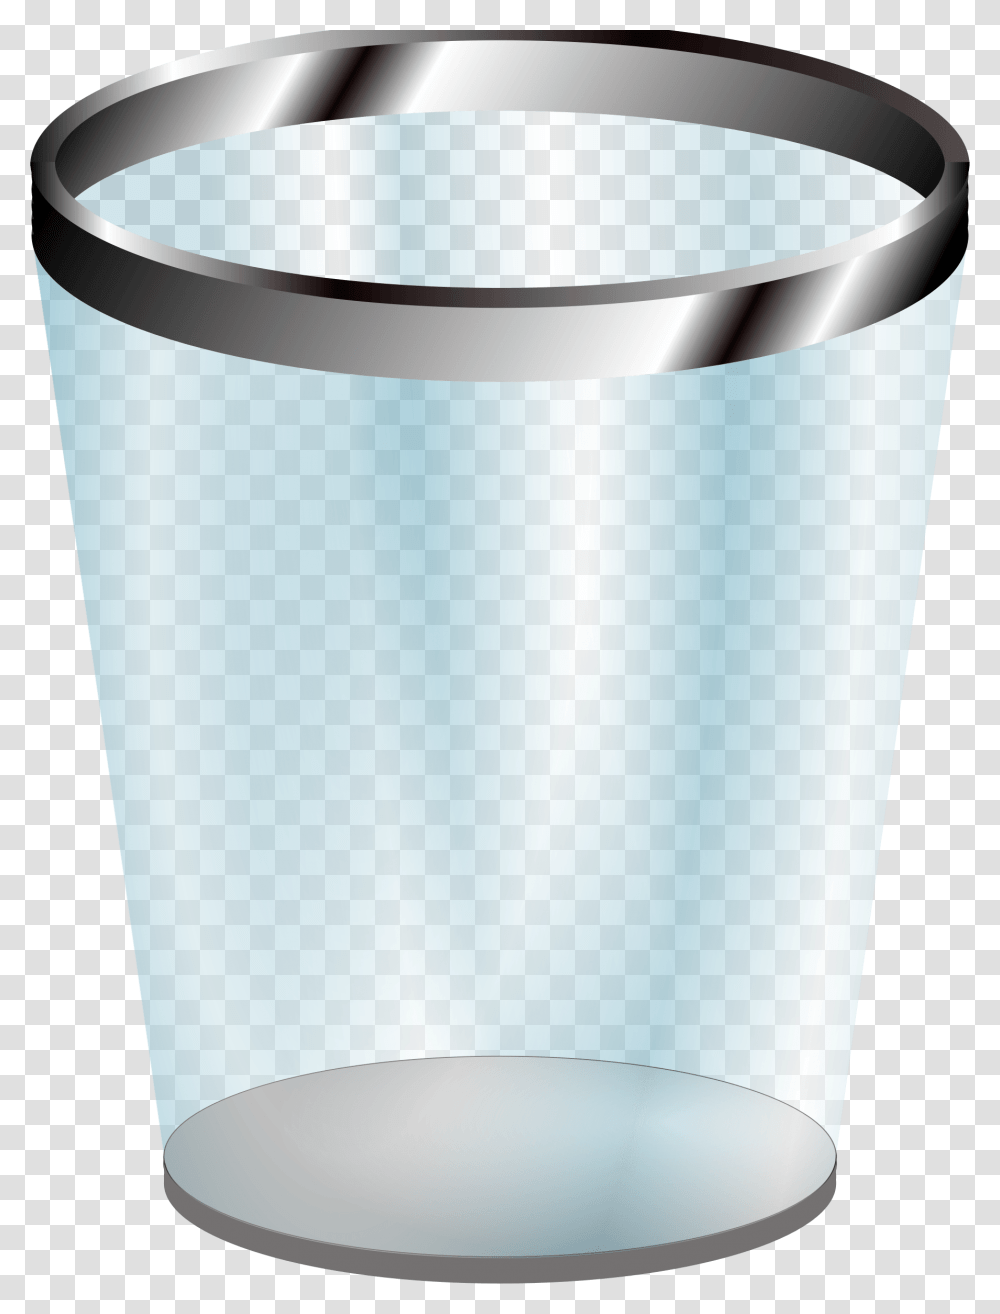 Clip Arts Related To Recycle Bin, Lamp, Shaker, Bottle, Glass Transparent Png